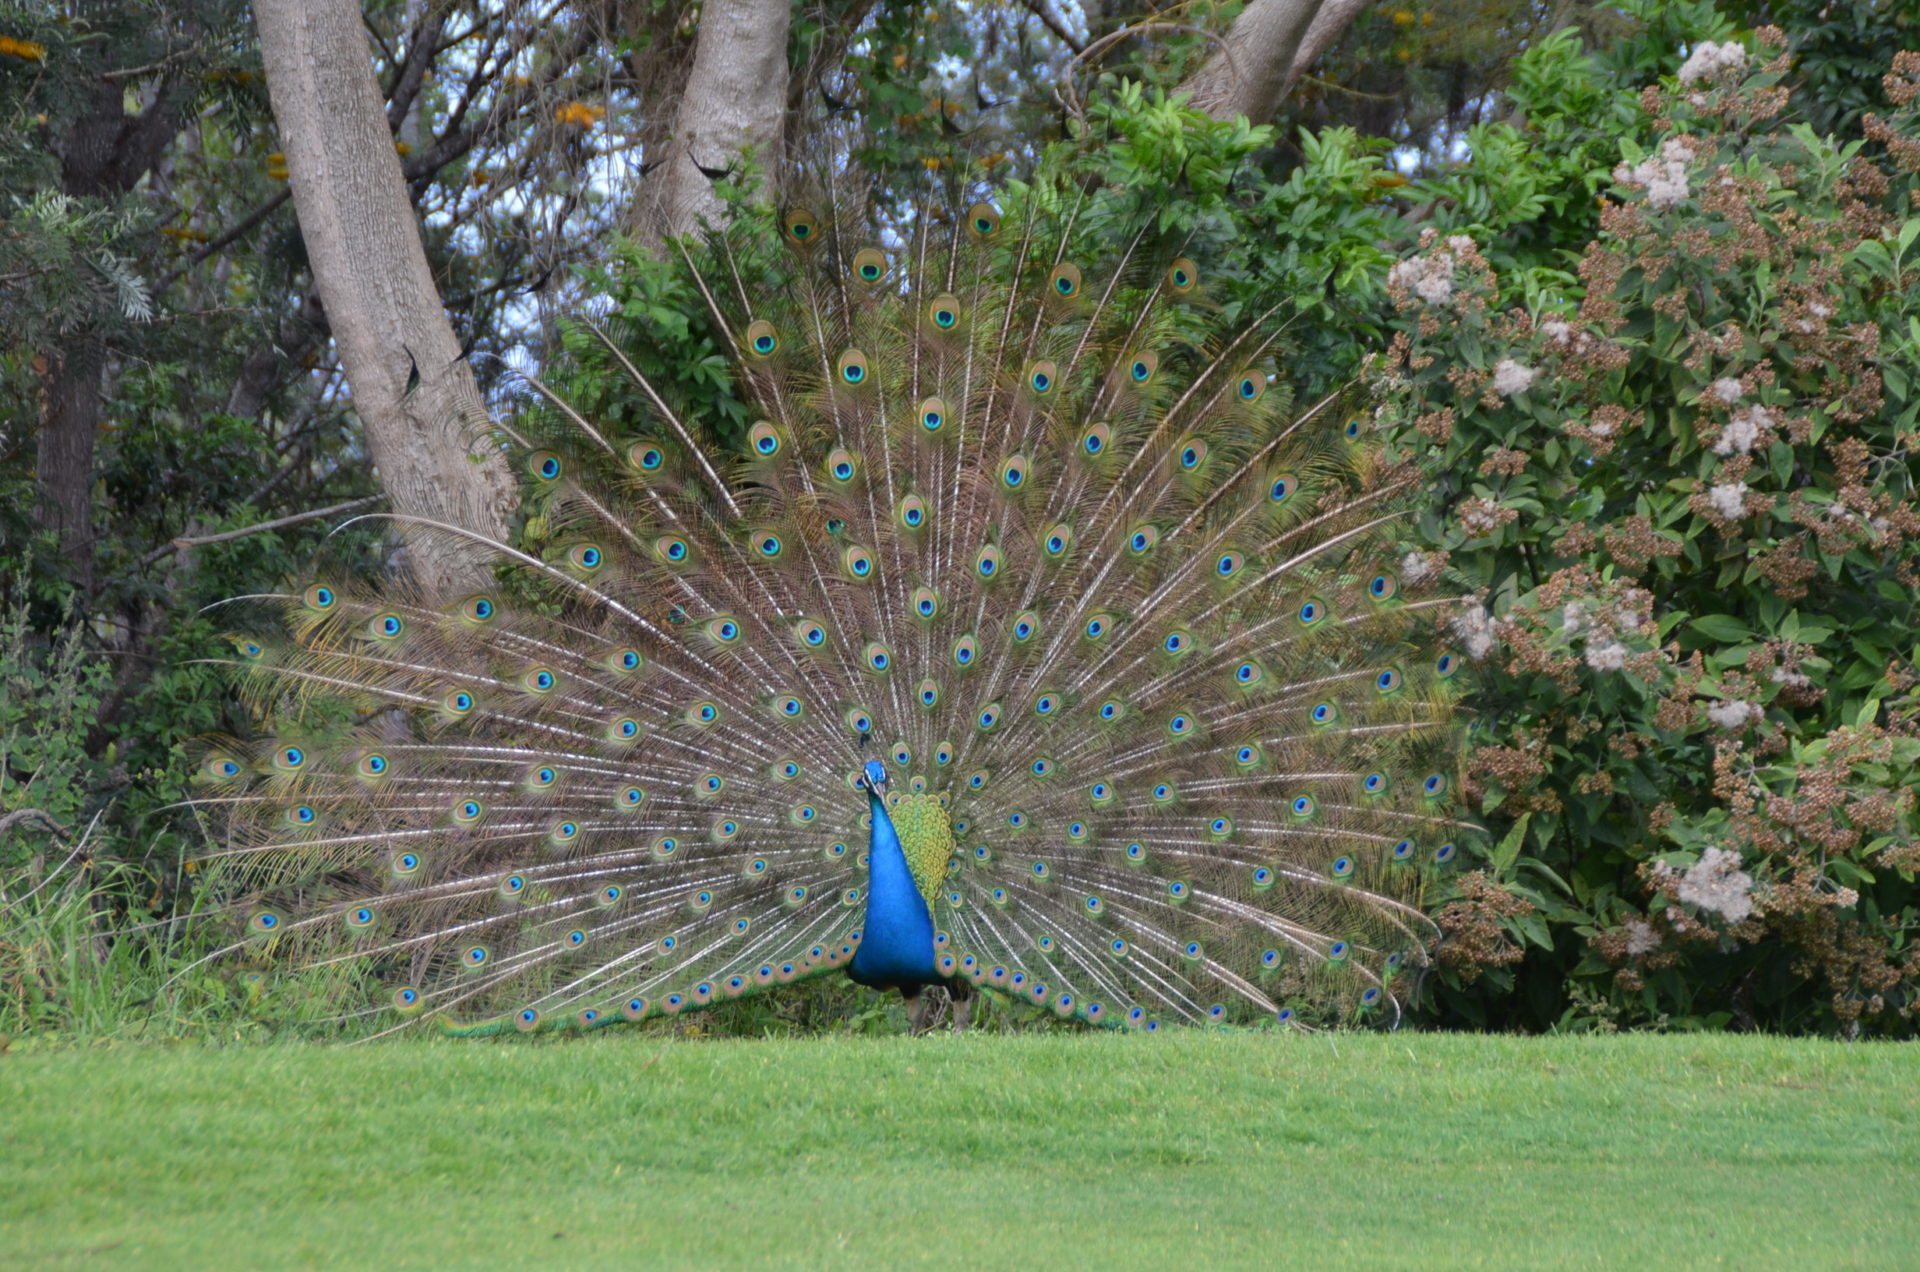 One Proud Peacock at Makalei Golf Course